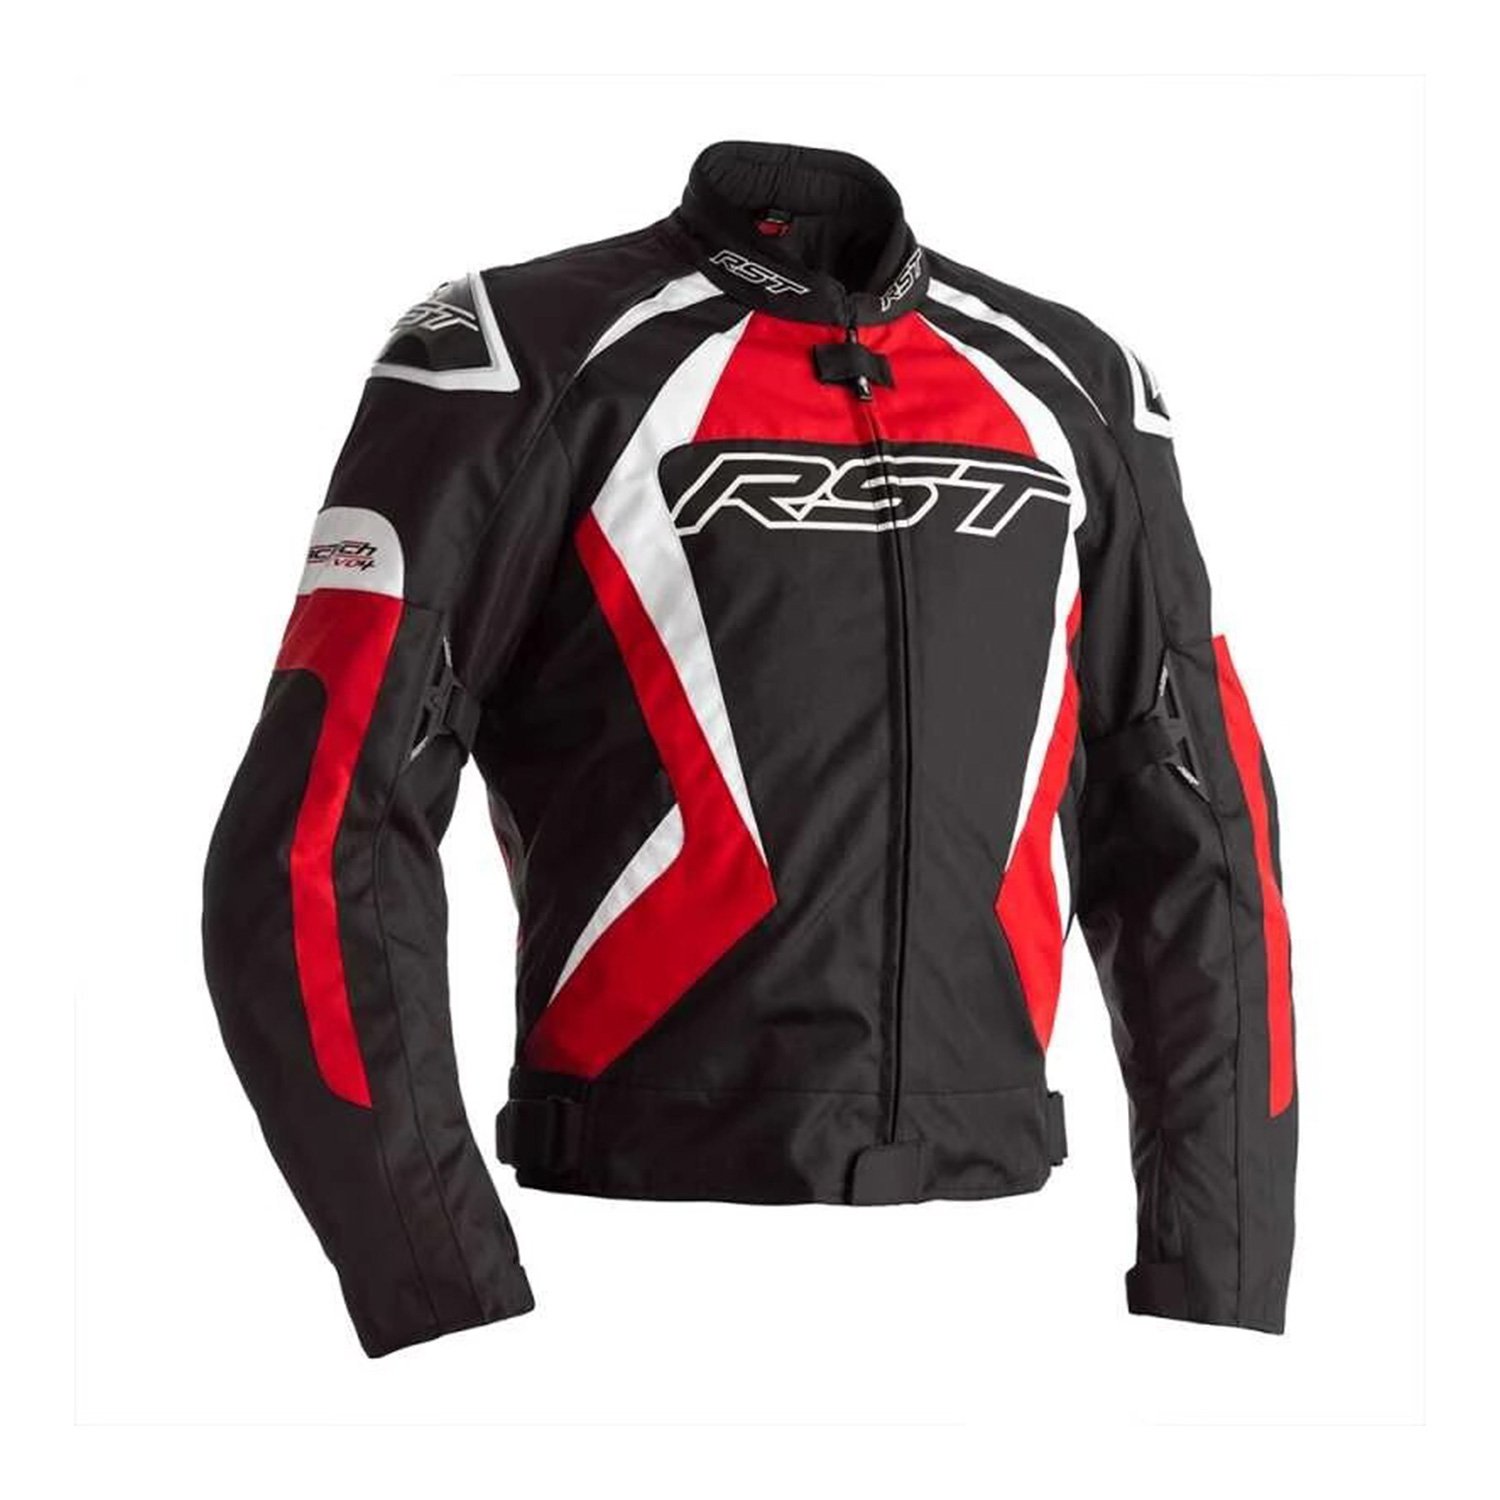 Image of RST Tractech Evo 4 CE Jacket Black Red White Size 42 EN